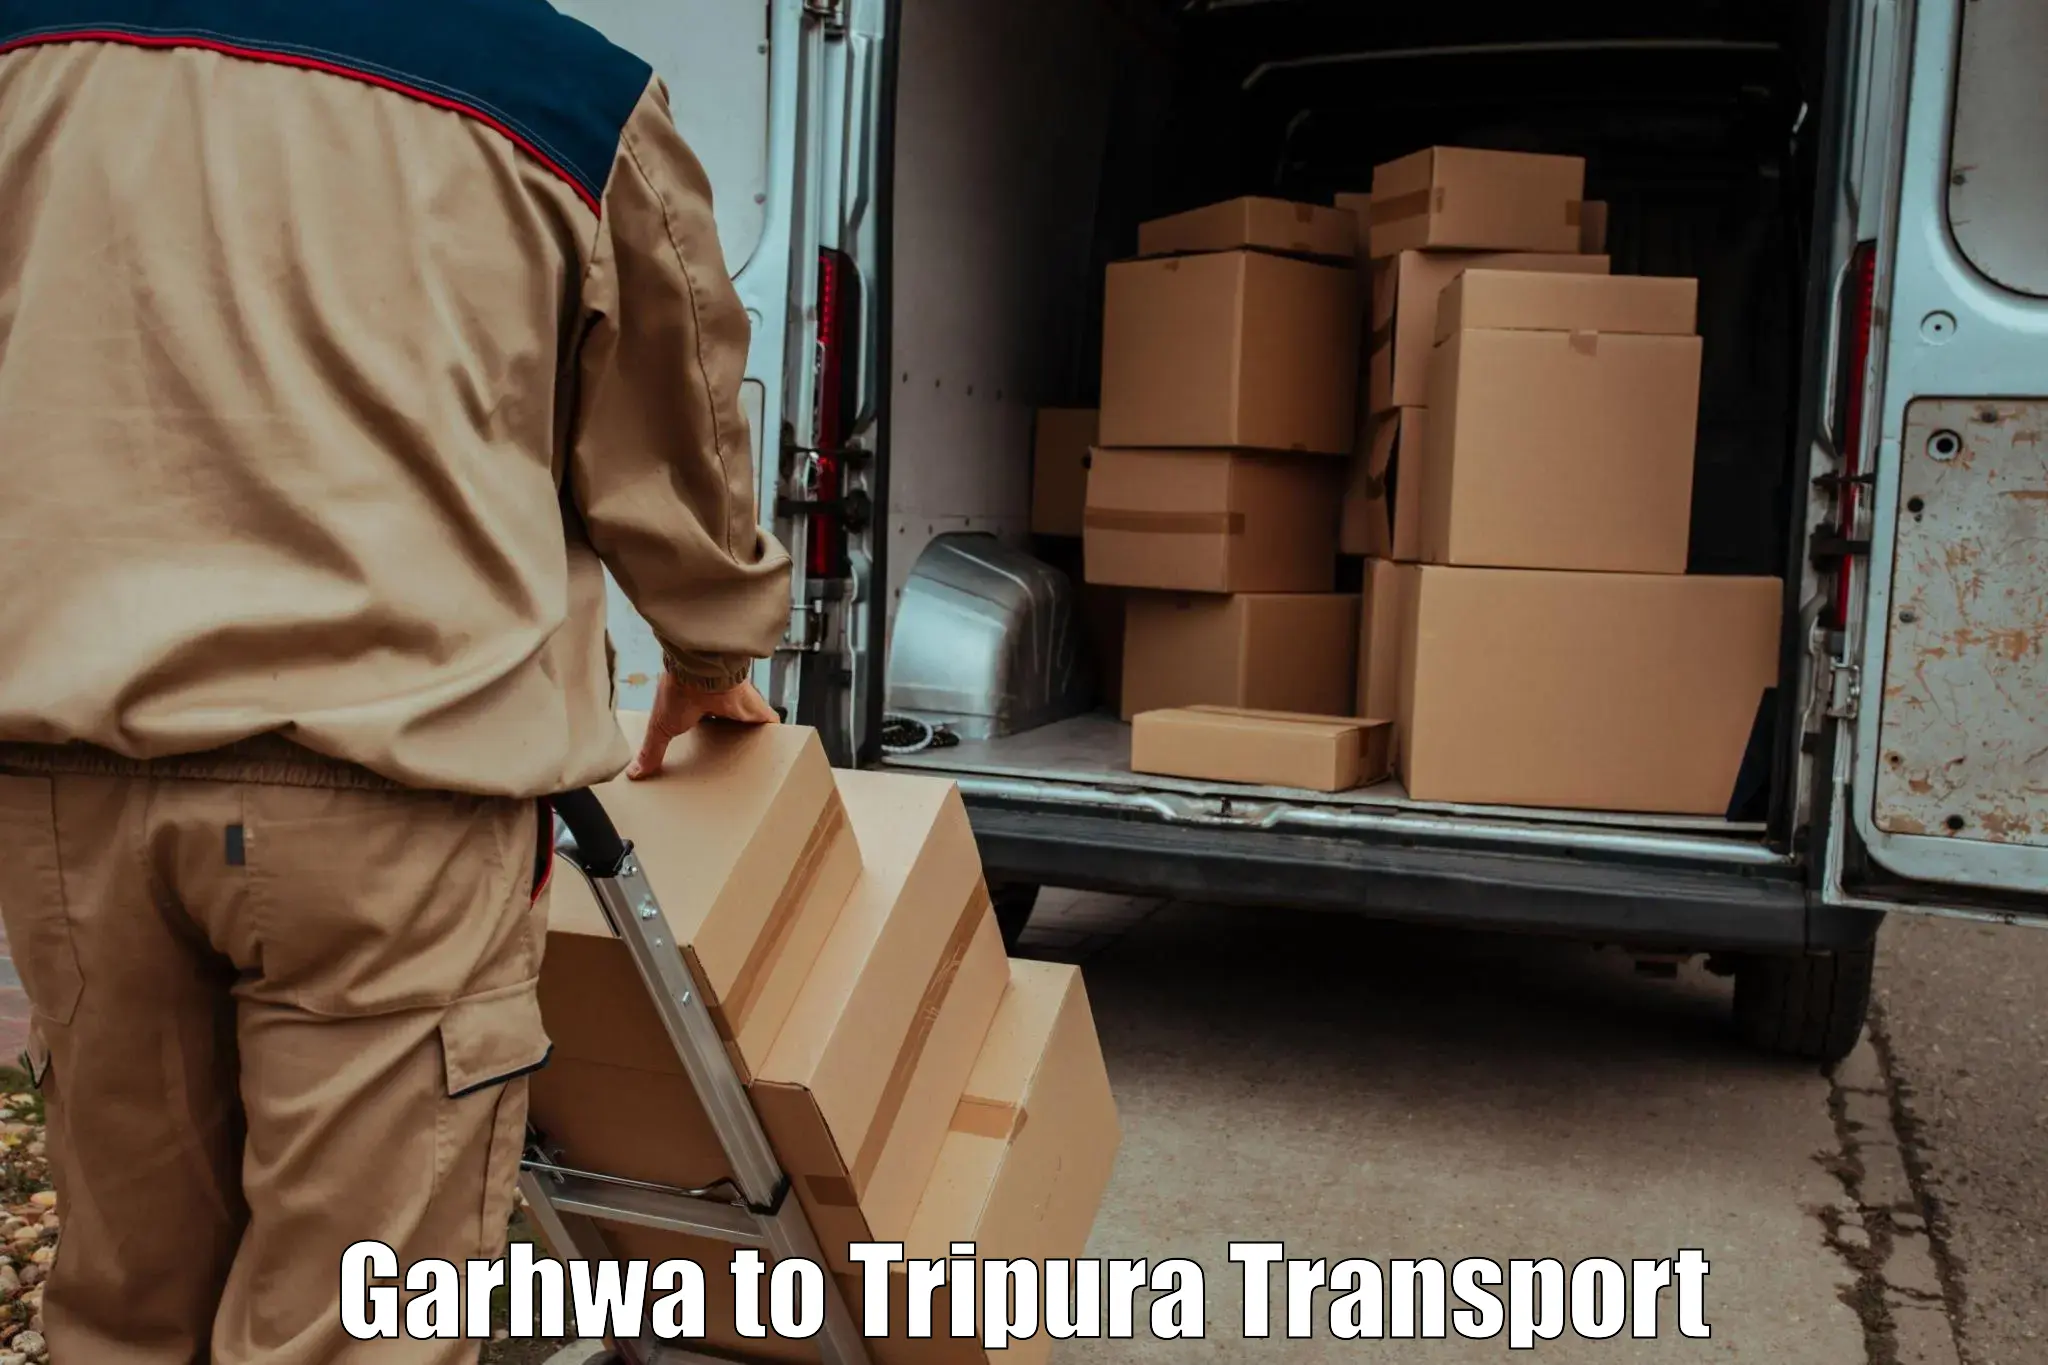 Luggage transport services in Garhwa to Udaipur Tripura